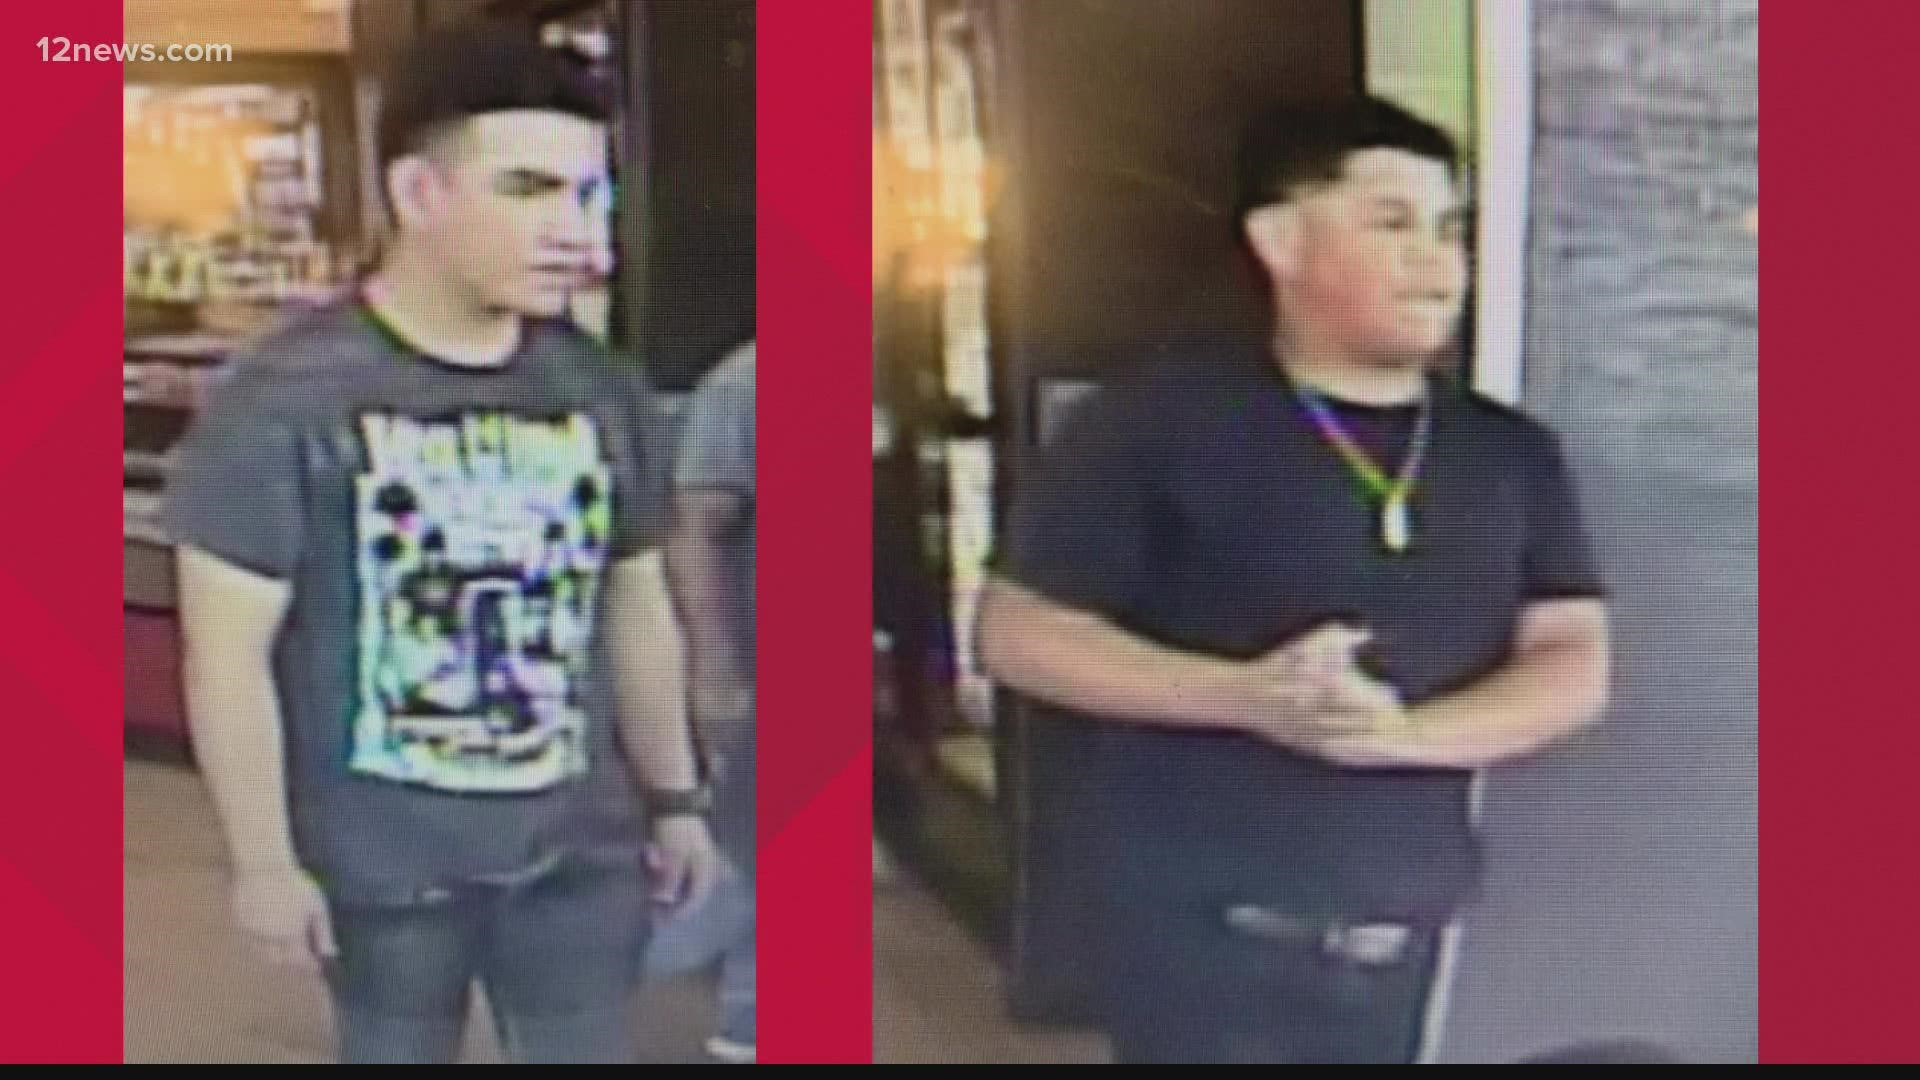 Avondale police are searching for two suspects accused of killing someone on Thursday.